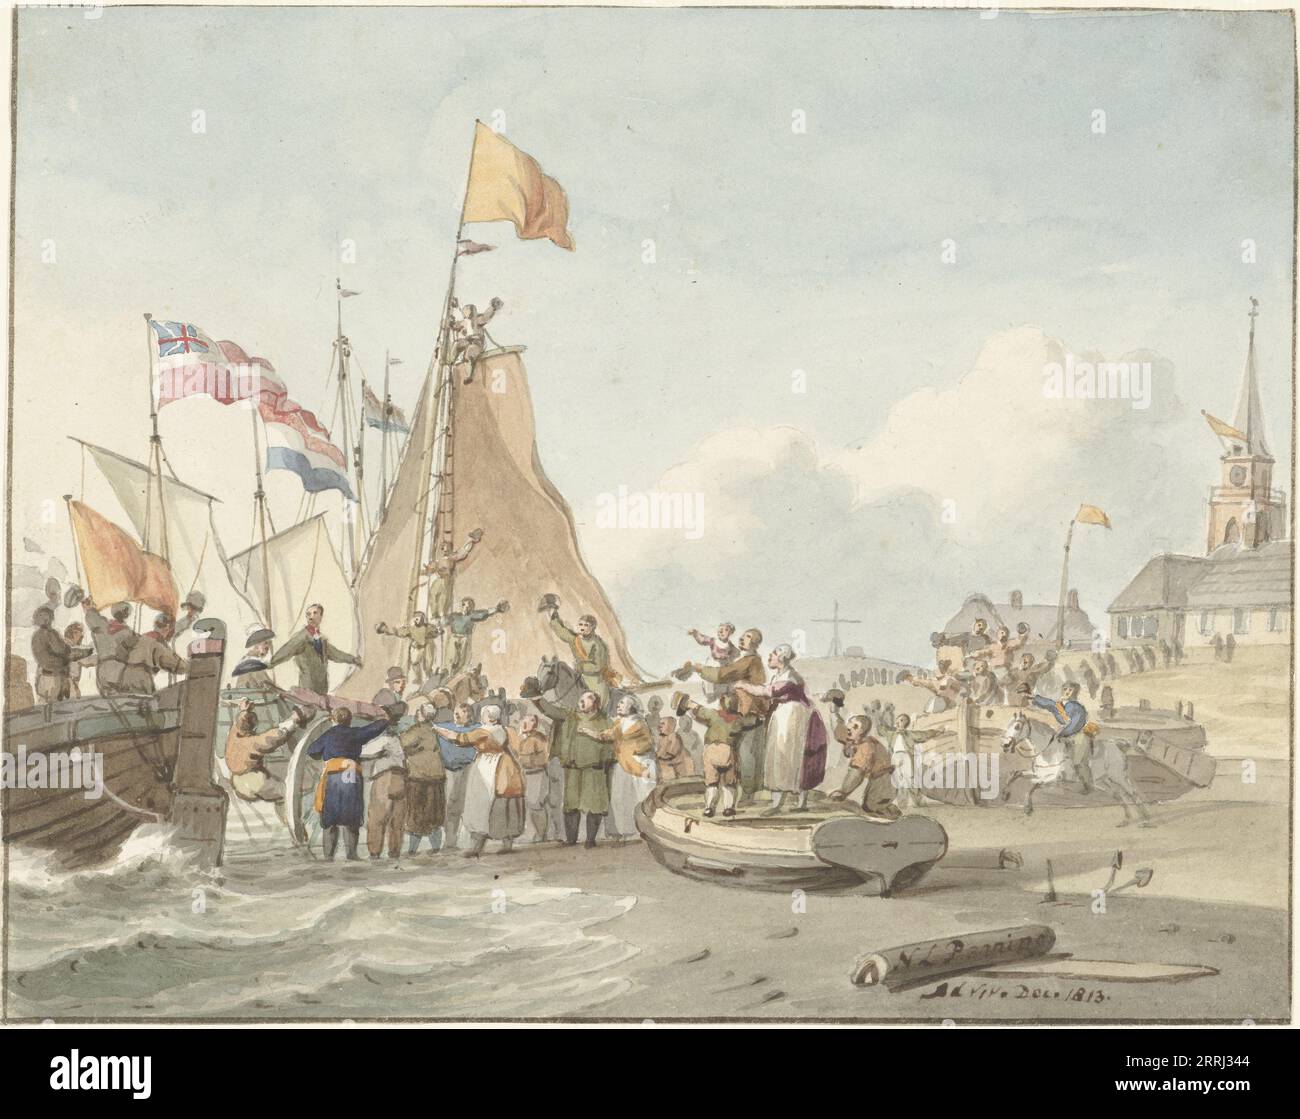 Arrival of Prince Willem Frederik in Scheveningen, November 30, 1813, (1813). An enthusiastic crowd greets the prince on the beach at Scheveningen, as he prepares to assume the government of the Netherlands as a sovereign prince. Stock Photo